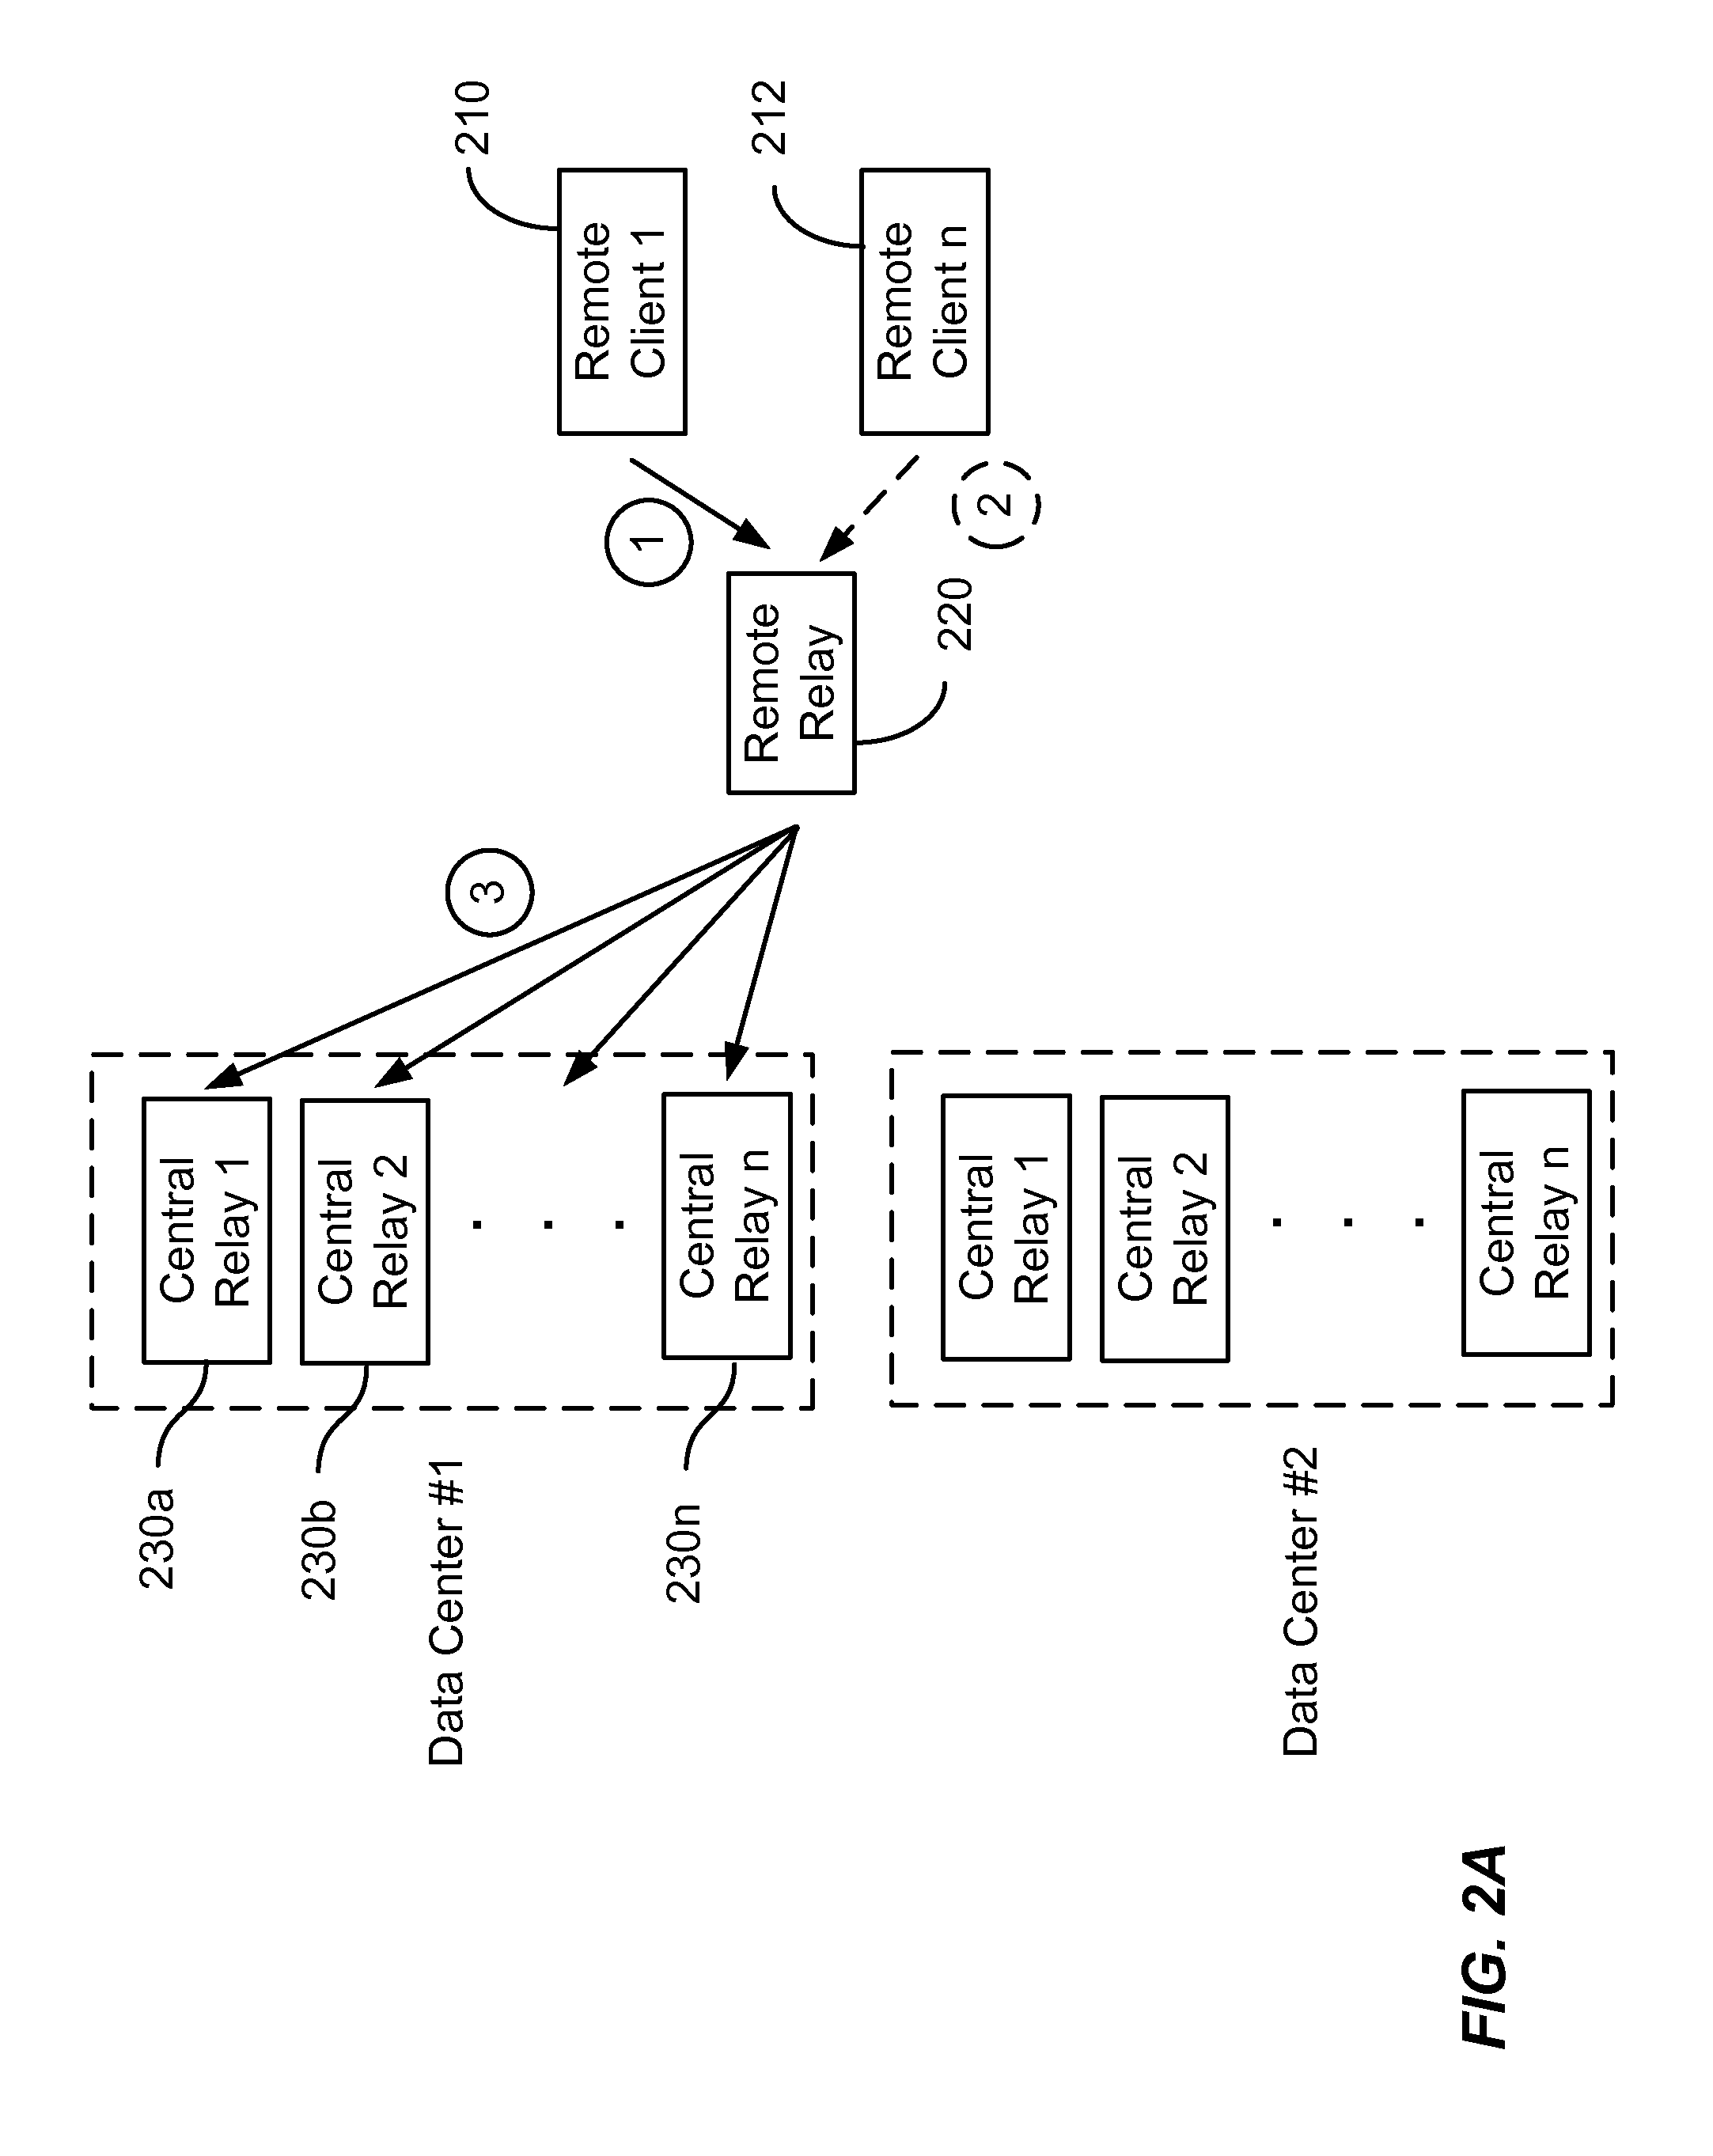 Method and system for application level load balancing in a publish/subscribe message architecture